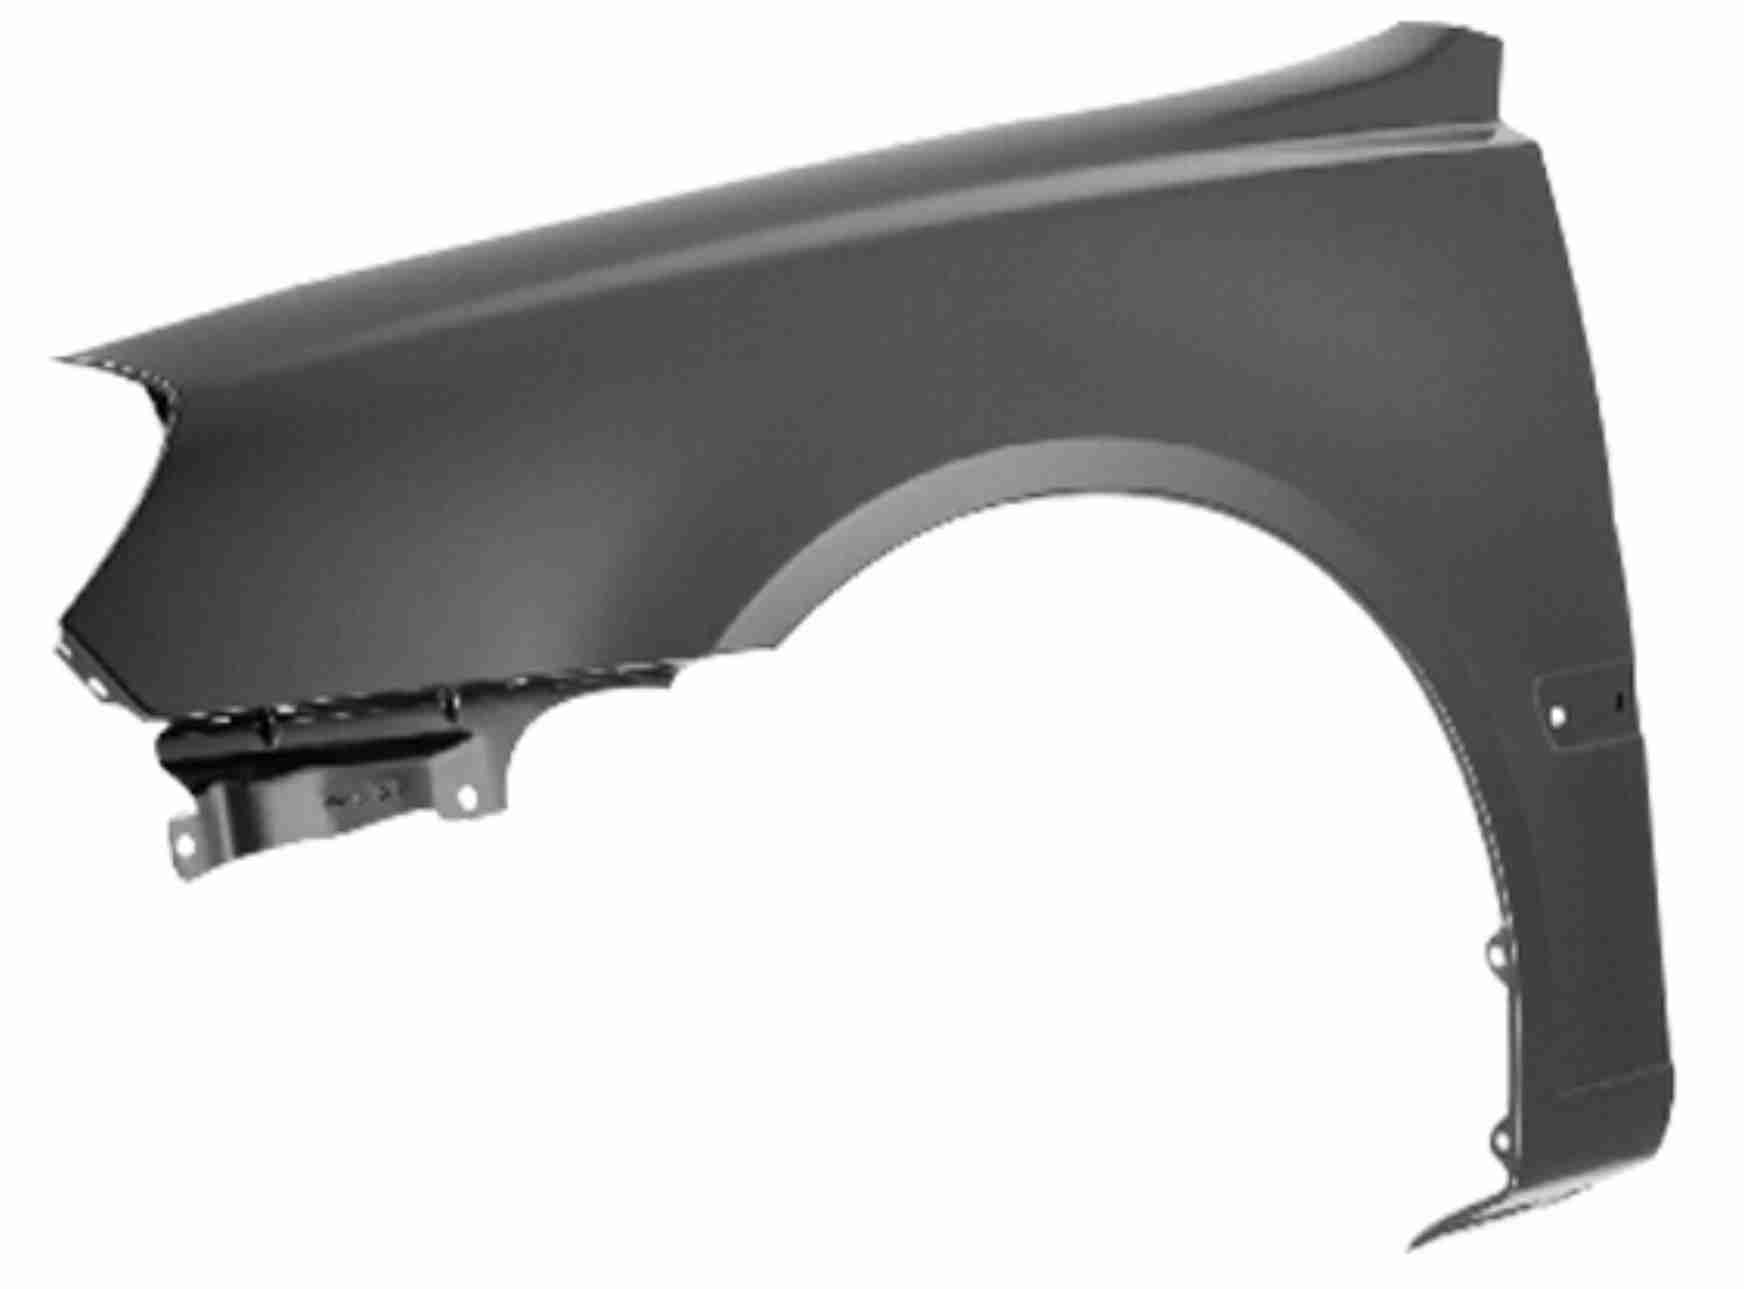 FEN501783(R) - ACCENT 2003-2005 FENDER WITHOUT SIDE LAMP HOLE...2005348